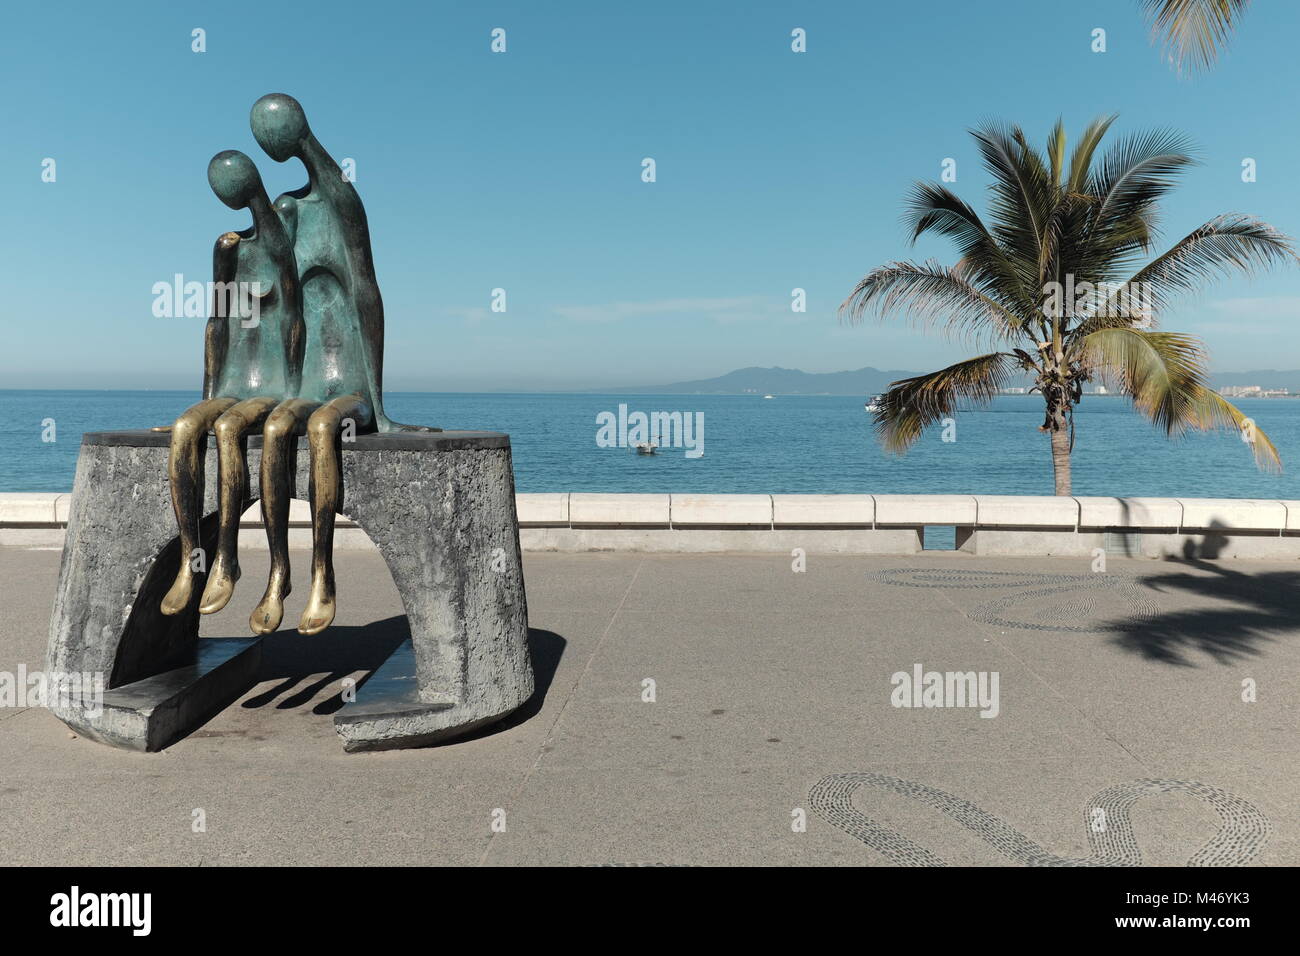 'Nostalgia' by Ramiz Barquet has been a ficture of the seaside malecon in Puerto Vallarta, Mexico since 1984. Stock Photo